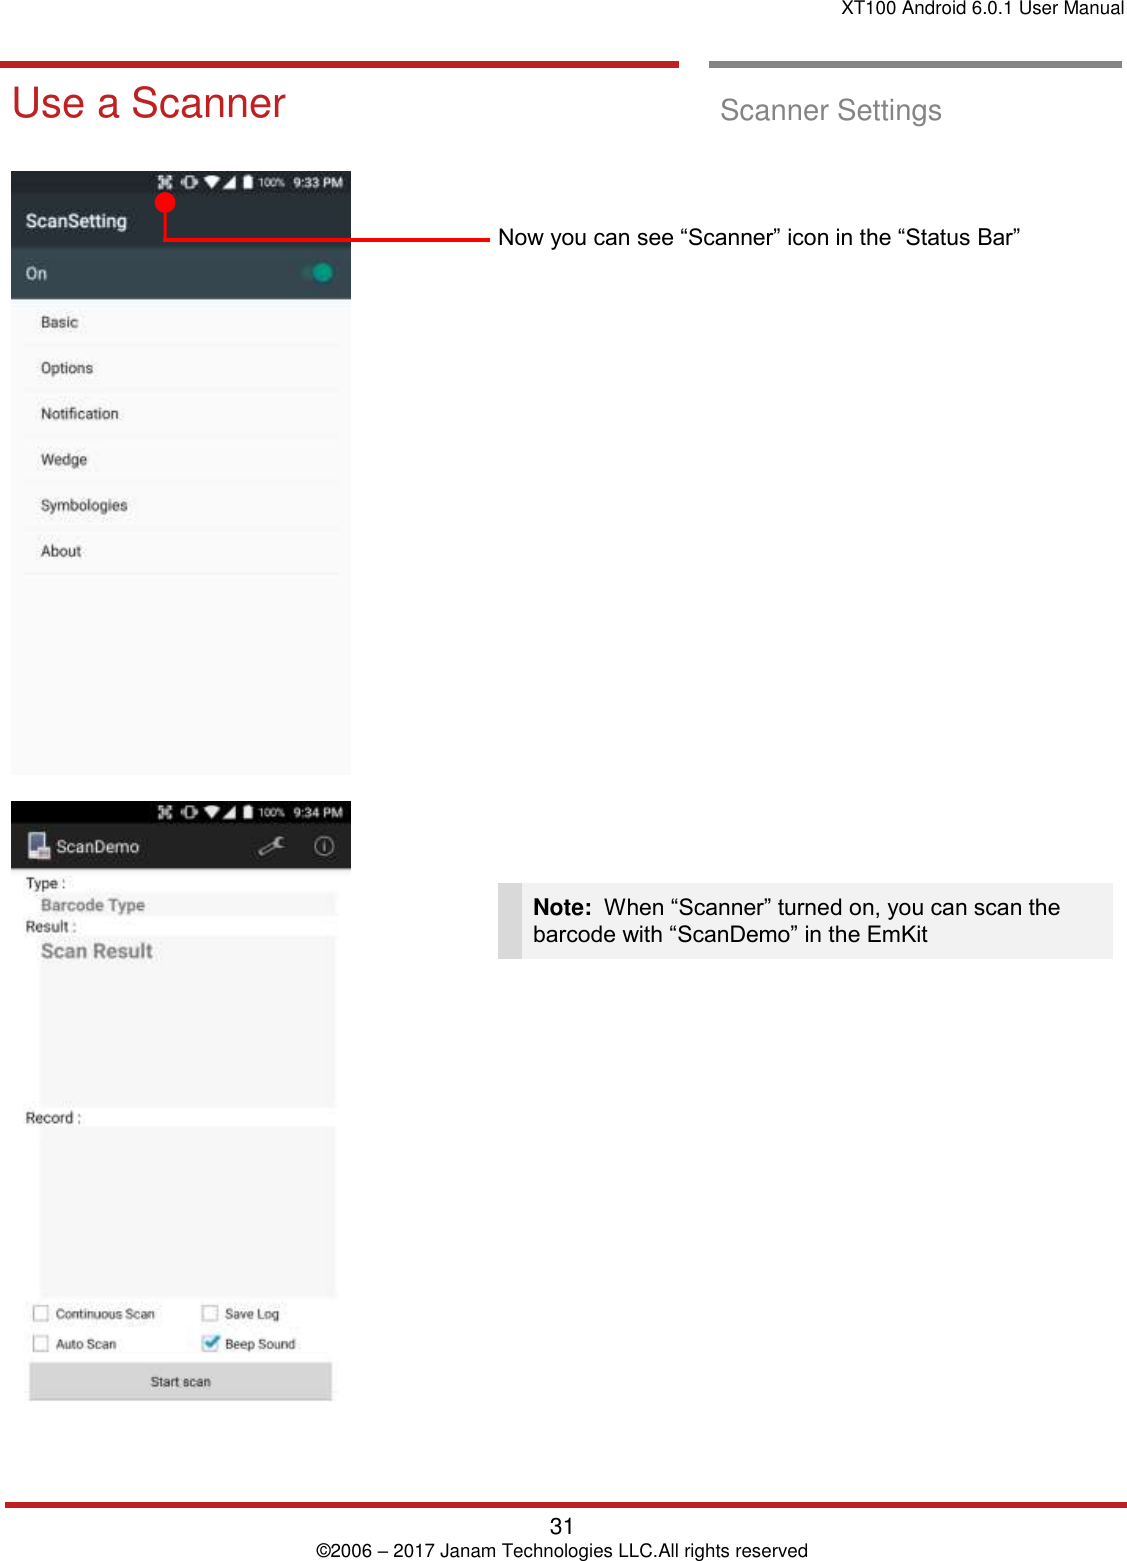 XT100 Android 6.0.1 User Manual   31 © 2006 – 2017 Janam Technologies LLC.All rights reserved  Scanner Settings Use a Scanner  Scanner Settings       Now you can see “Scanner” icon in the “Status Bar”                          Note:  When “Scanner” turned on, you can scan the barcode with “ScanDemo” in the EmKit     